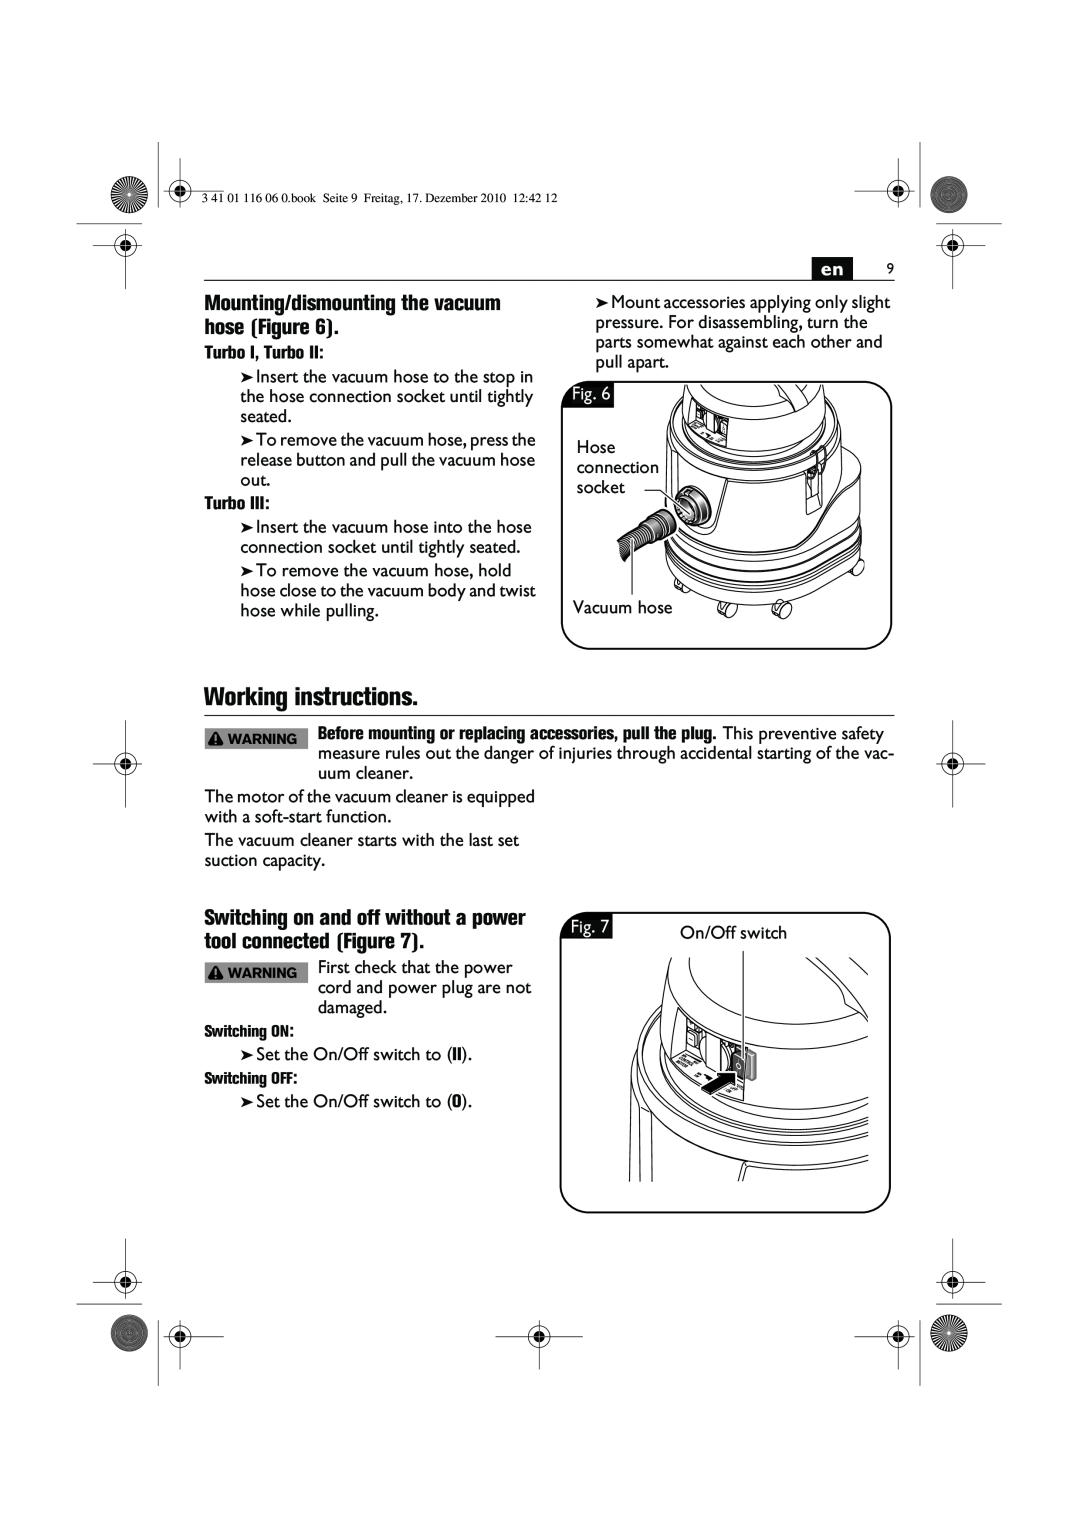 FEIN Power Tools 9 20 24, 9 20 26 Working instructions, Mounting/dismounting the vacuum hose Figure, tool connected Figure 